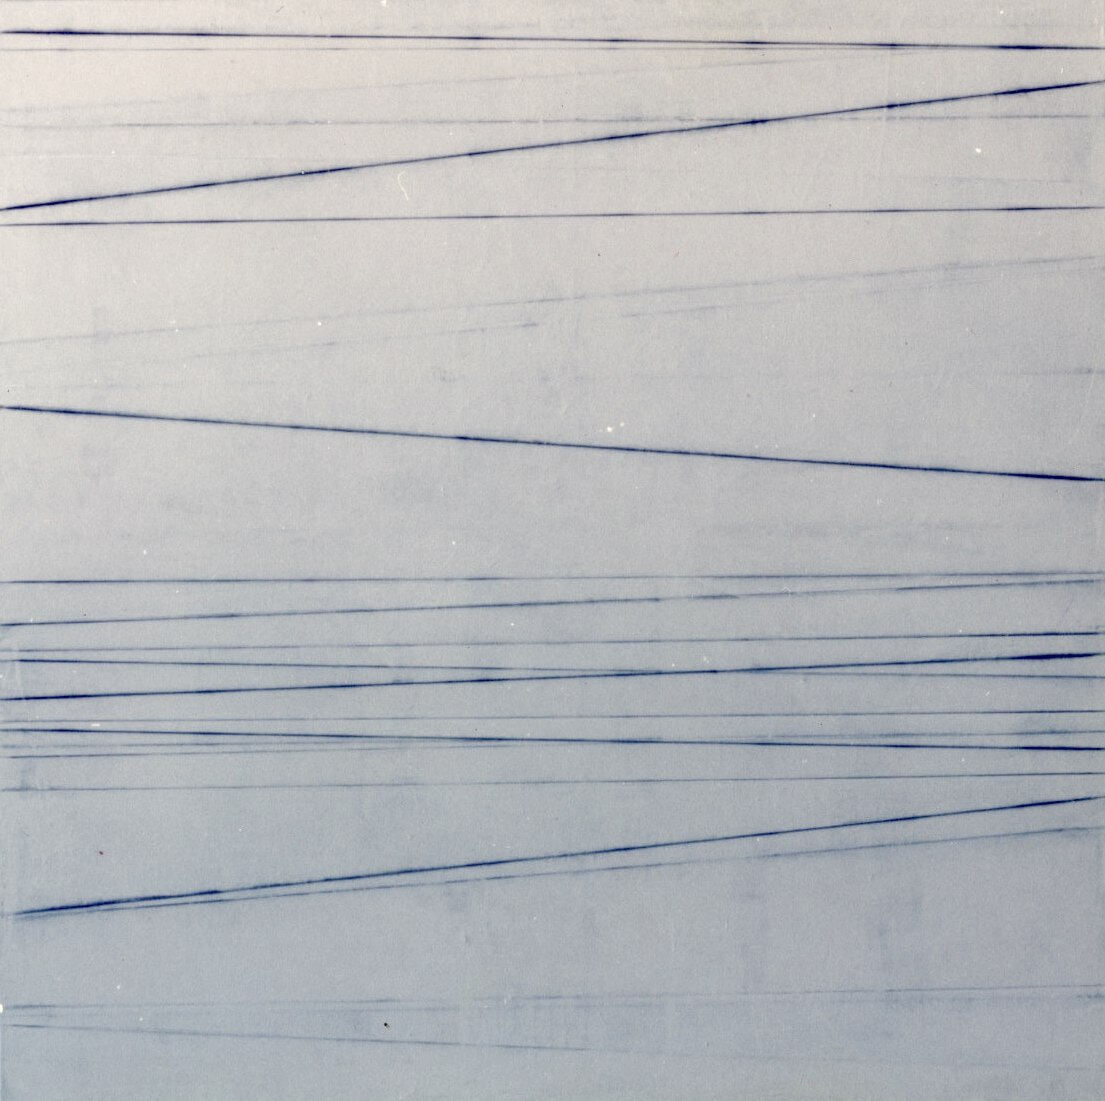 Untitled (Blue lines) #2